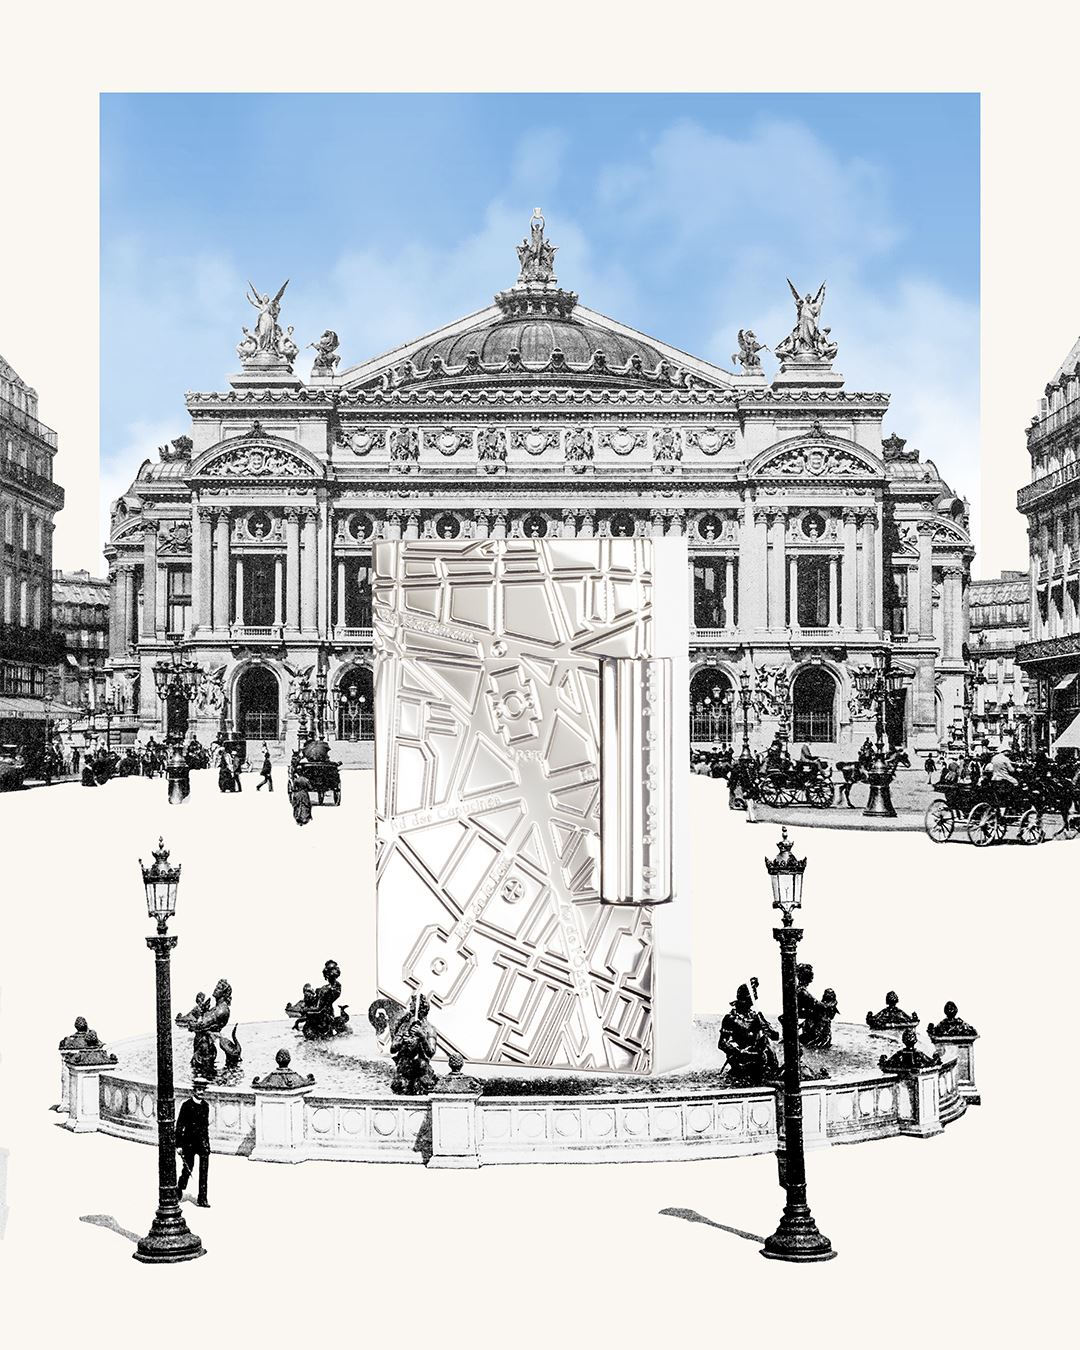 The new “Paris” lighter offers a bird’s eye view of meaningful Parisian locations for S.T. Dupont. As for example “10 rue de la Paix” the address of our flagship store between Opera Garnier and Place Vendôme. 